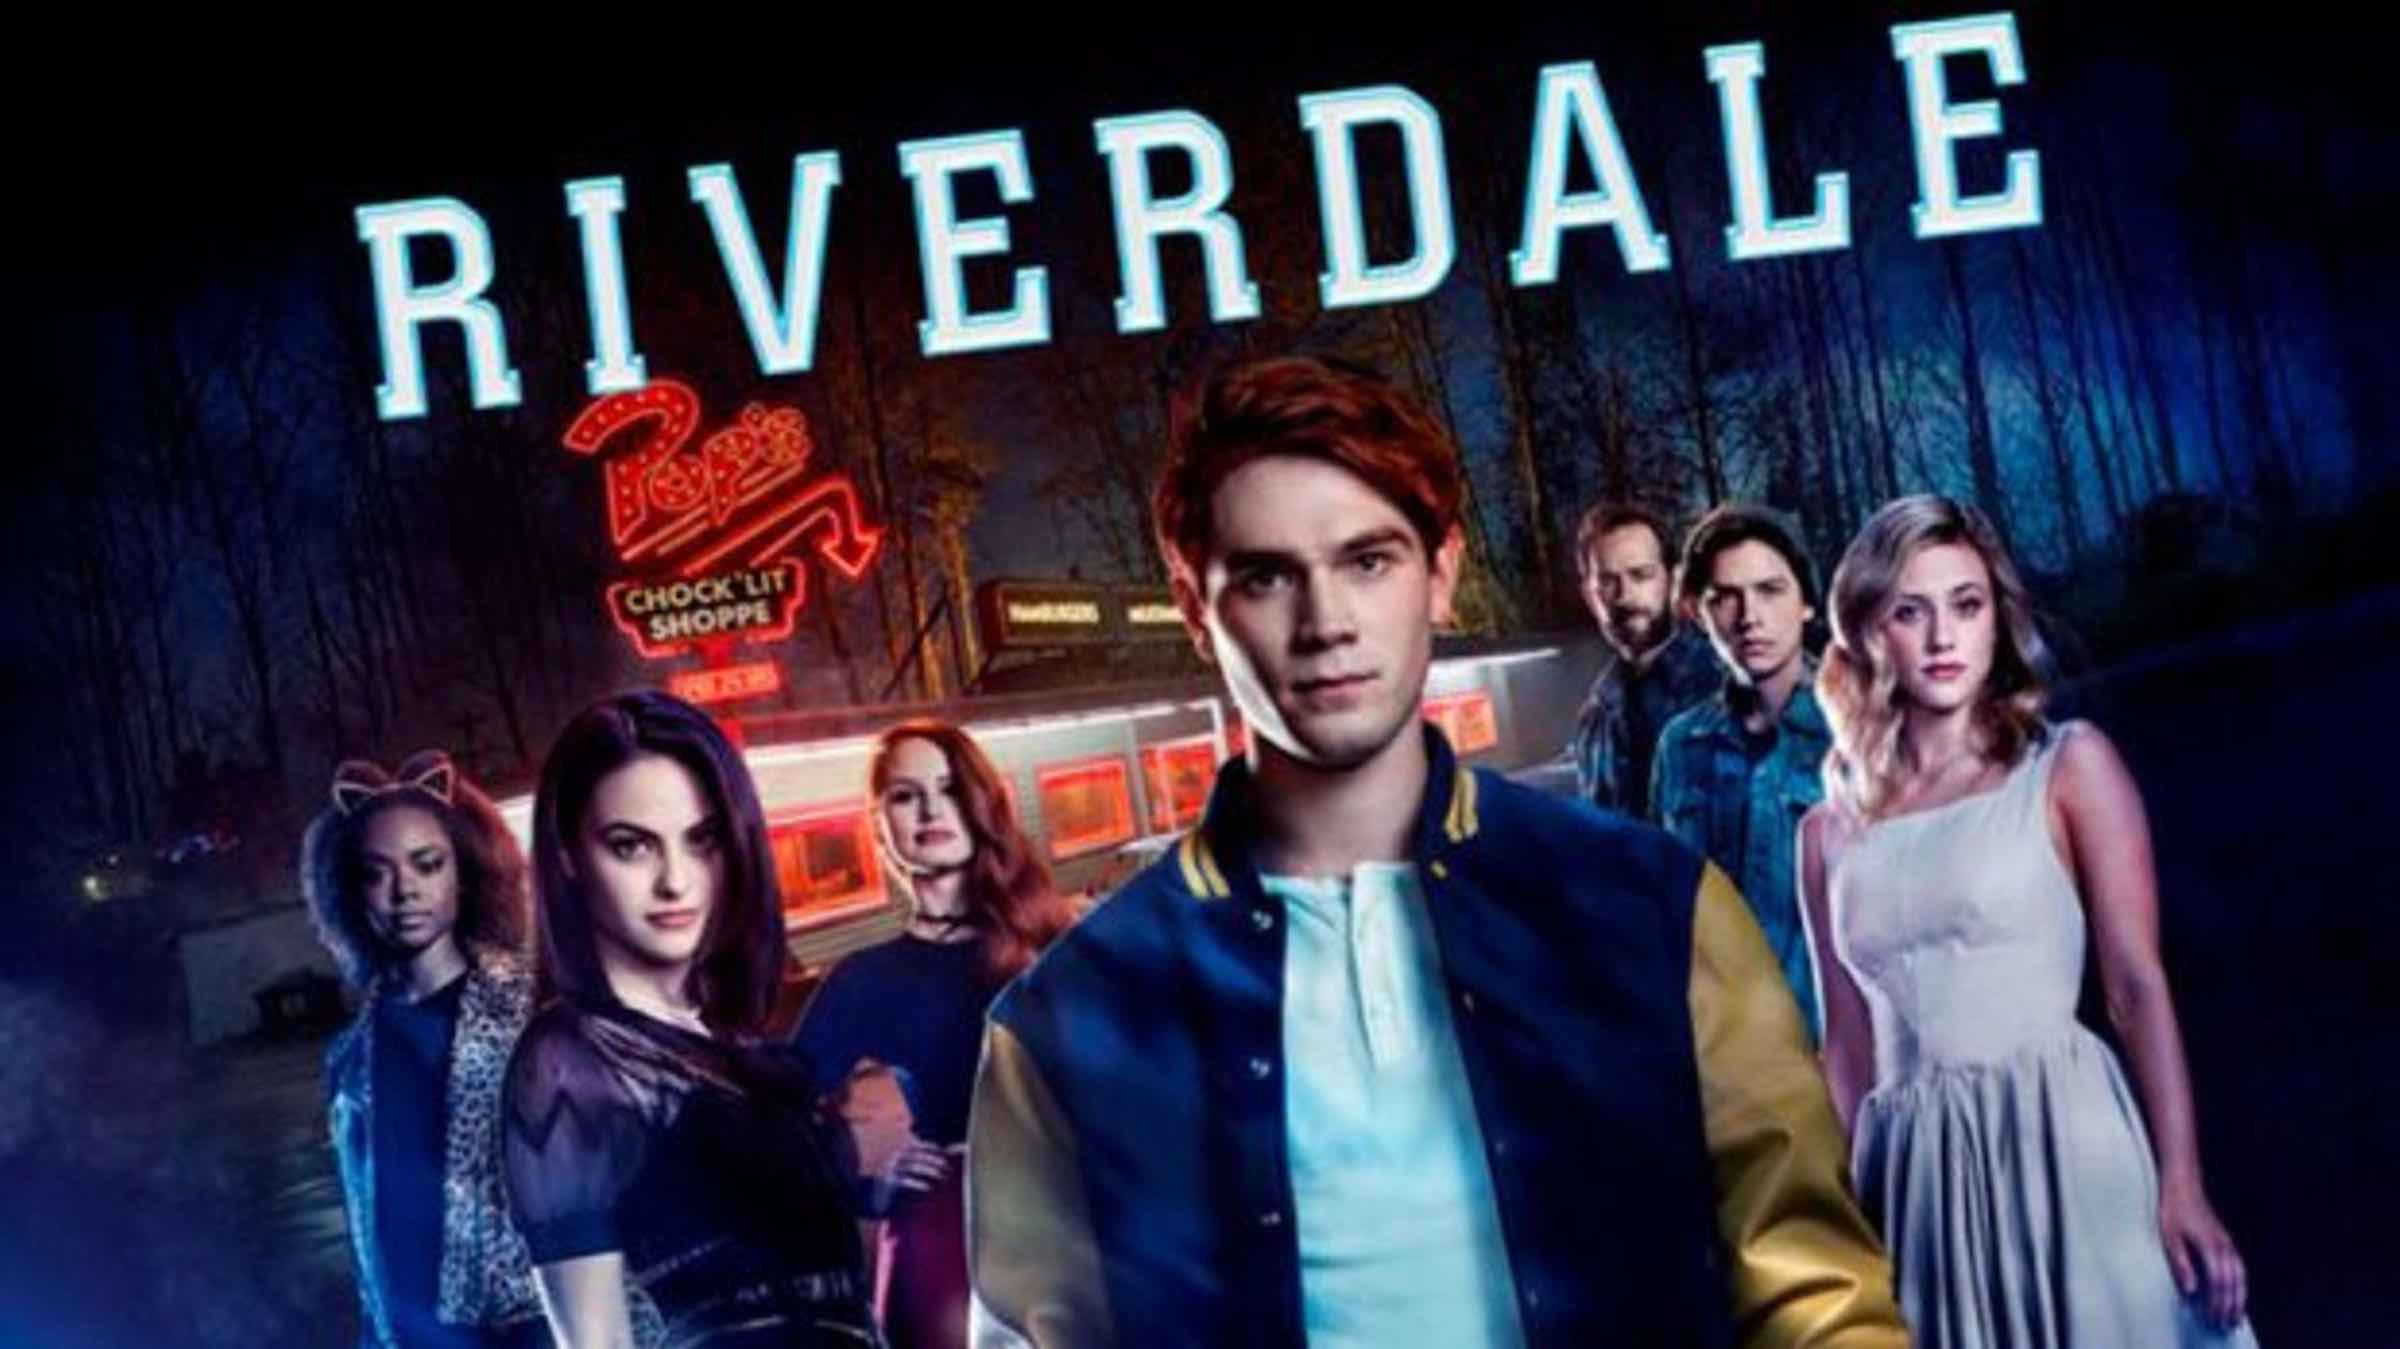 The CW's 'Riverdale' has more twists and turns than an M.C. Escher painting. But can the fandom come out ahead of all others for the Bingewatch Awards?